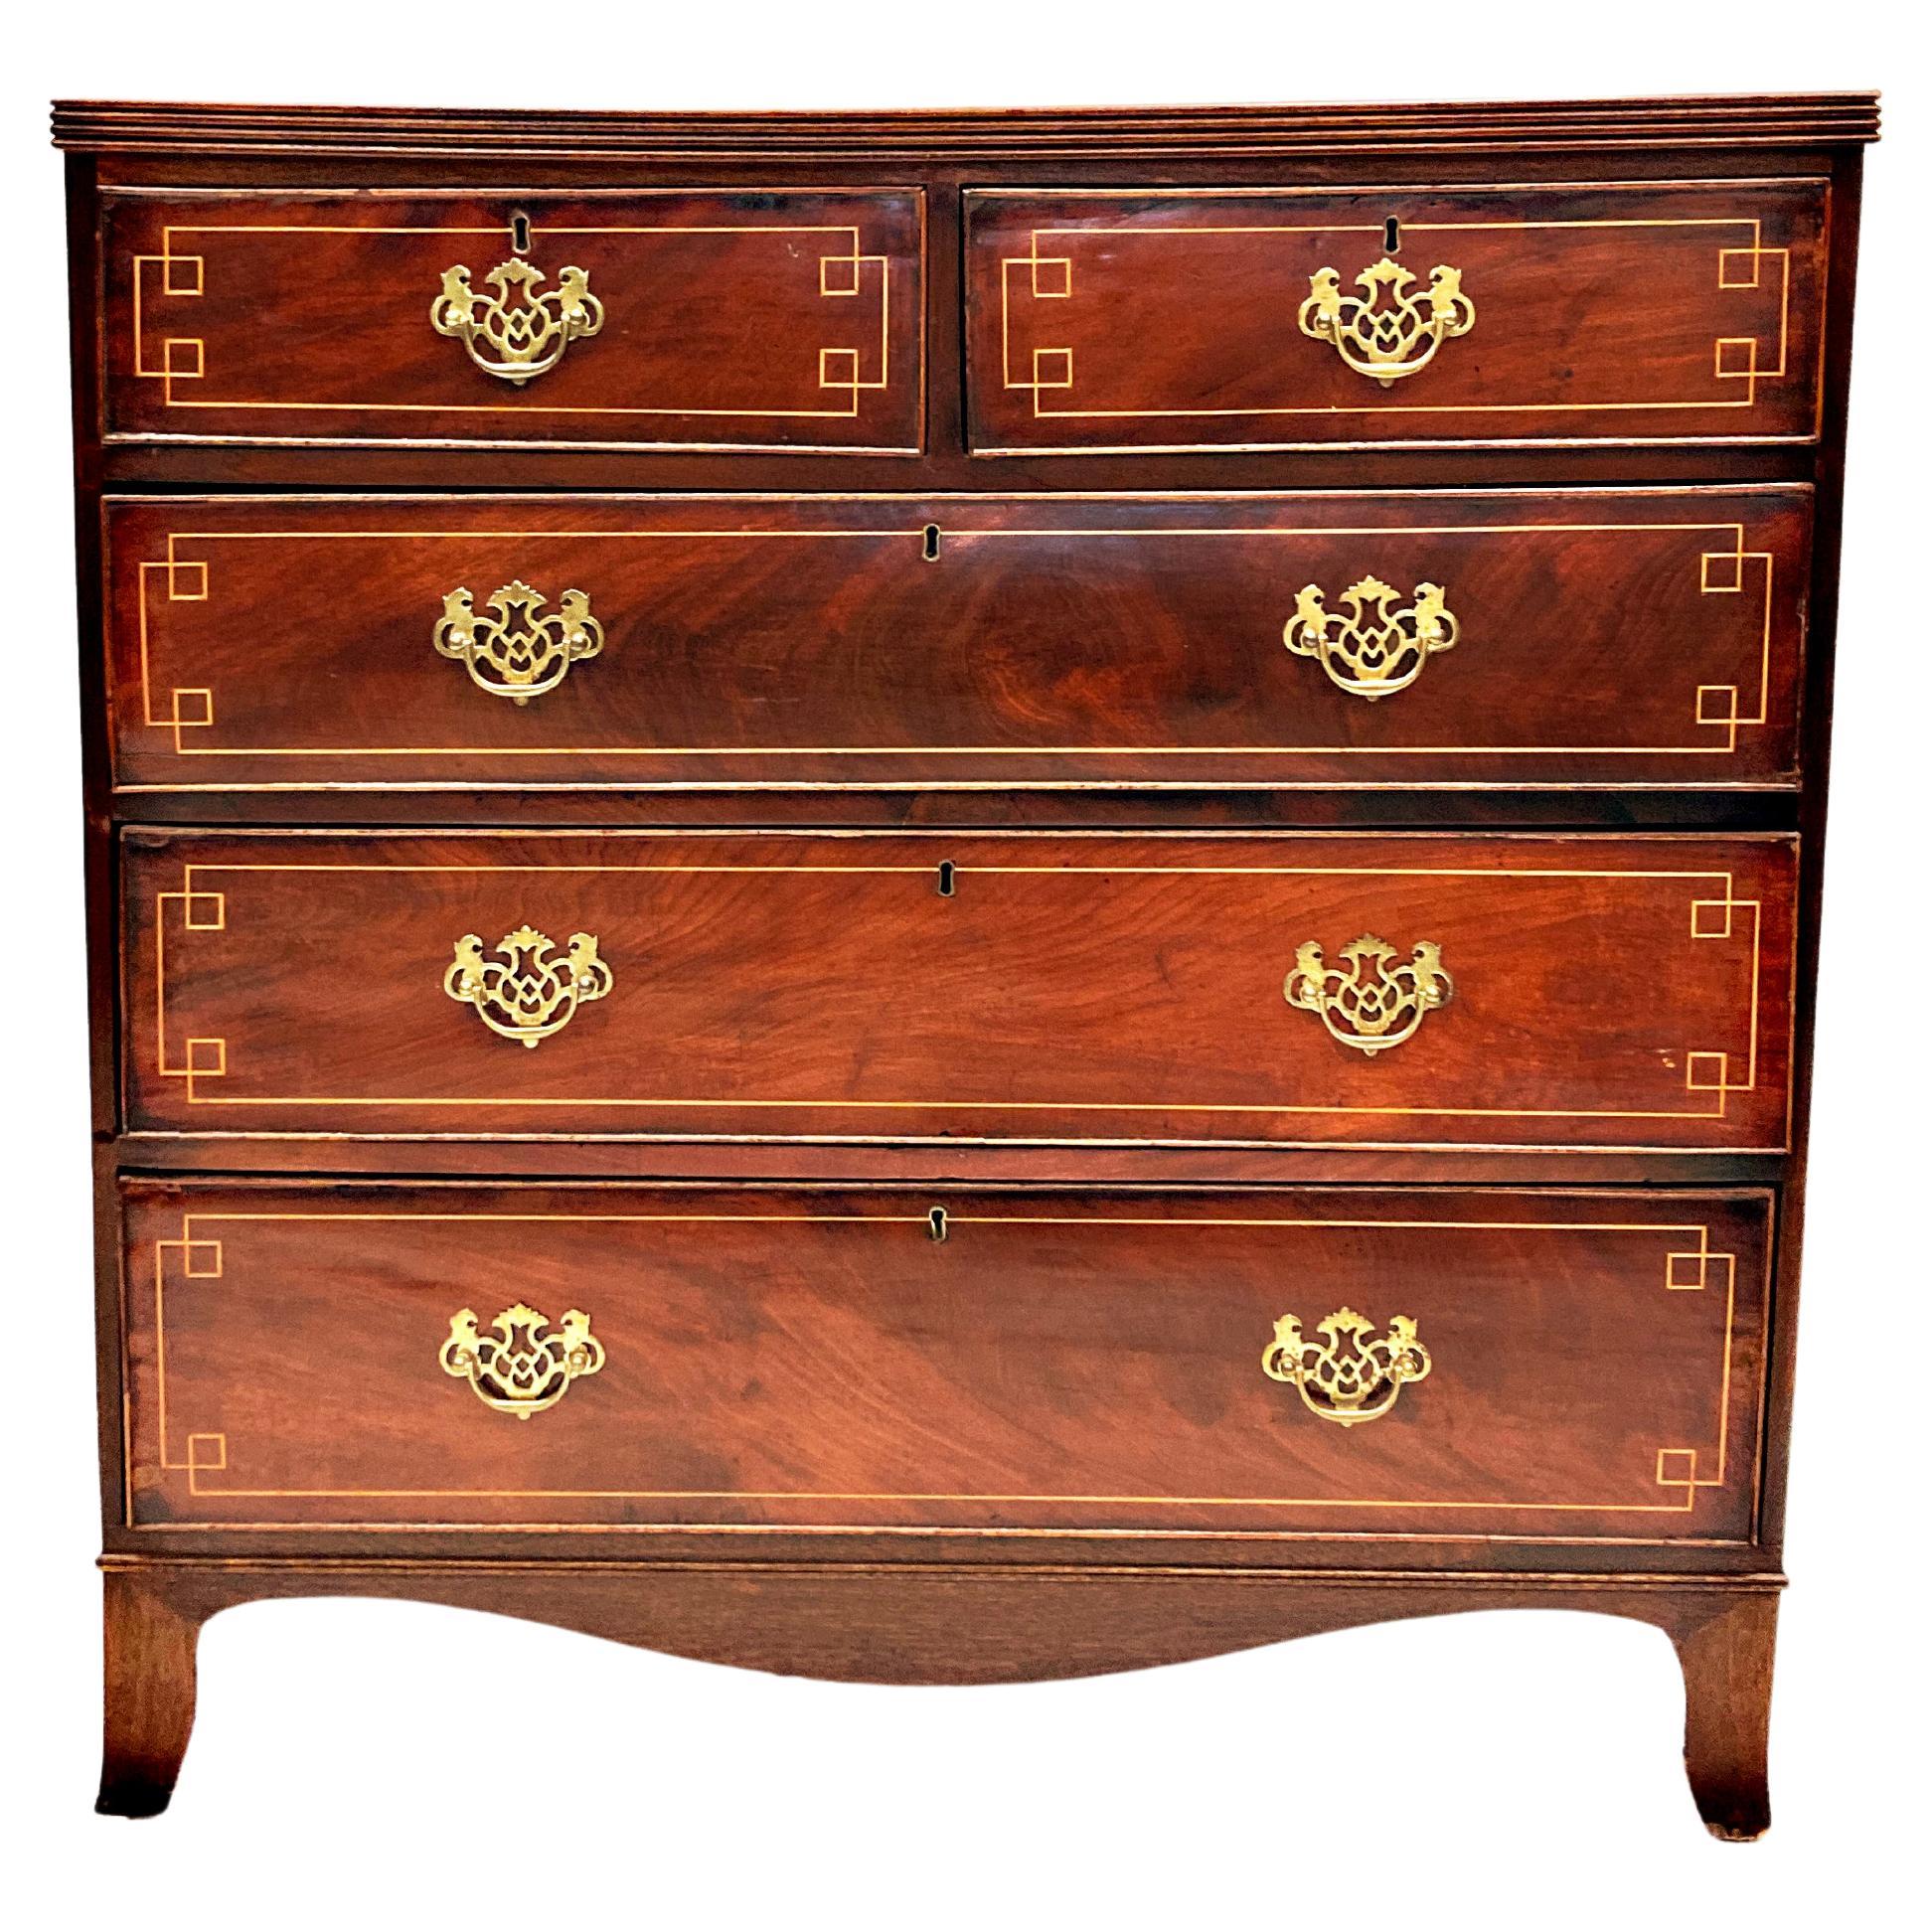 1740’s King George III Flame Mahogany Rosewood and Tulipwood Chest of Drawers For Sale